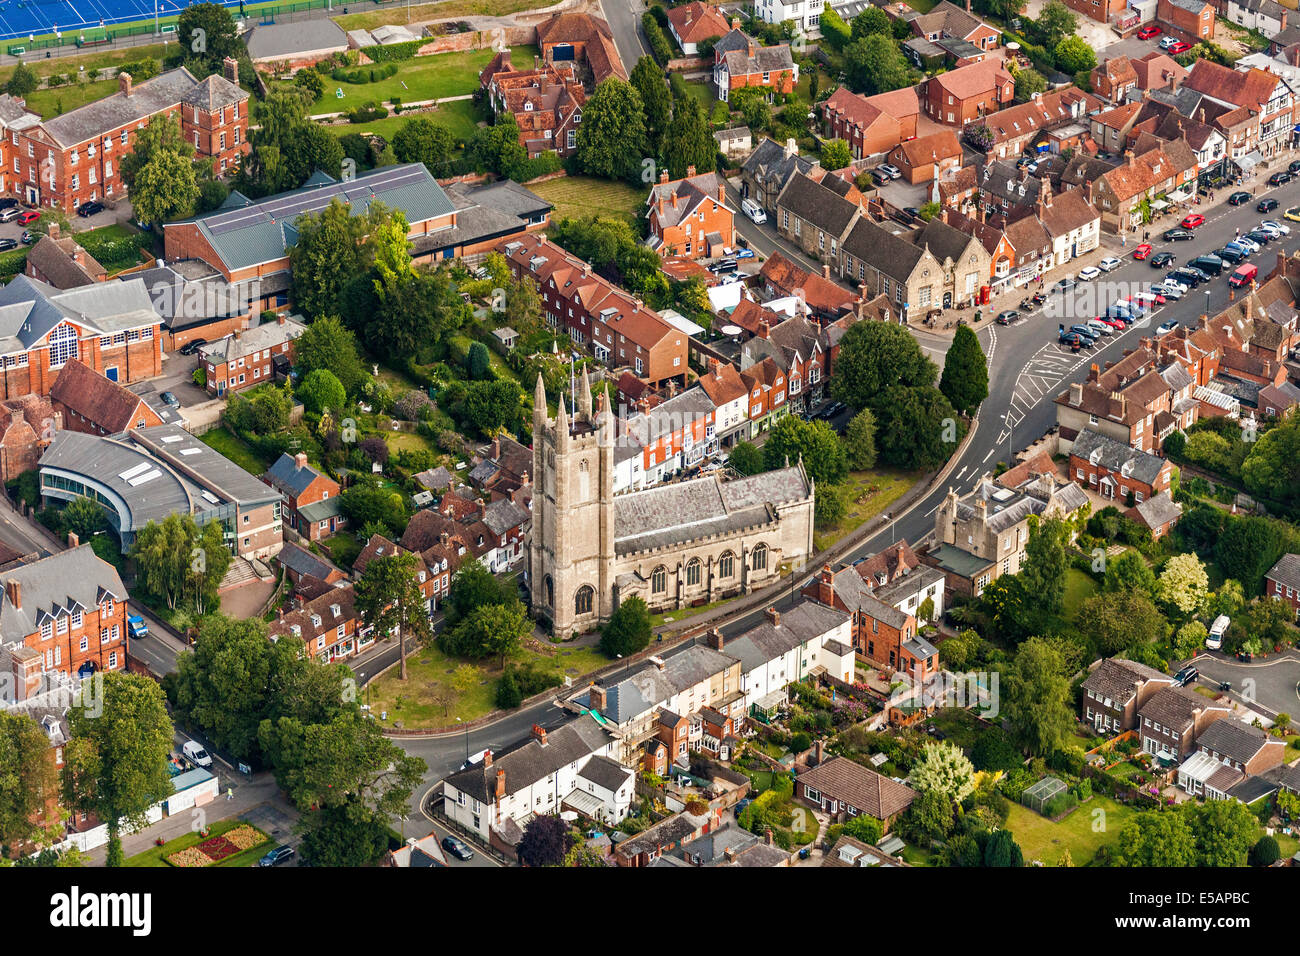 Aerial view of Marlborough, Wiltshire, UK with the former Parish Church of St Peter centre. JMH6214 Stock Photo